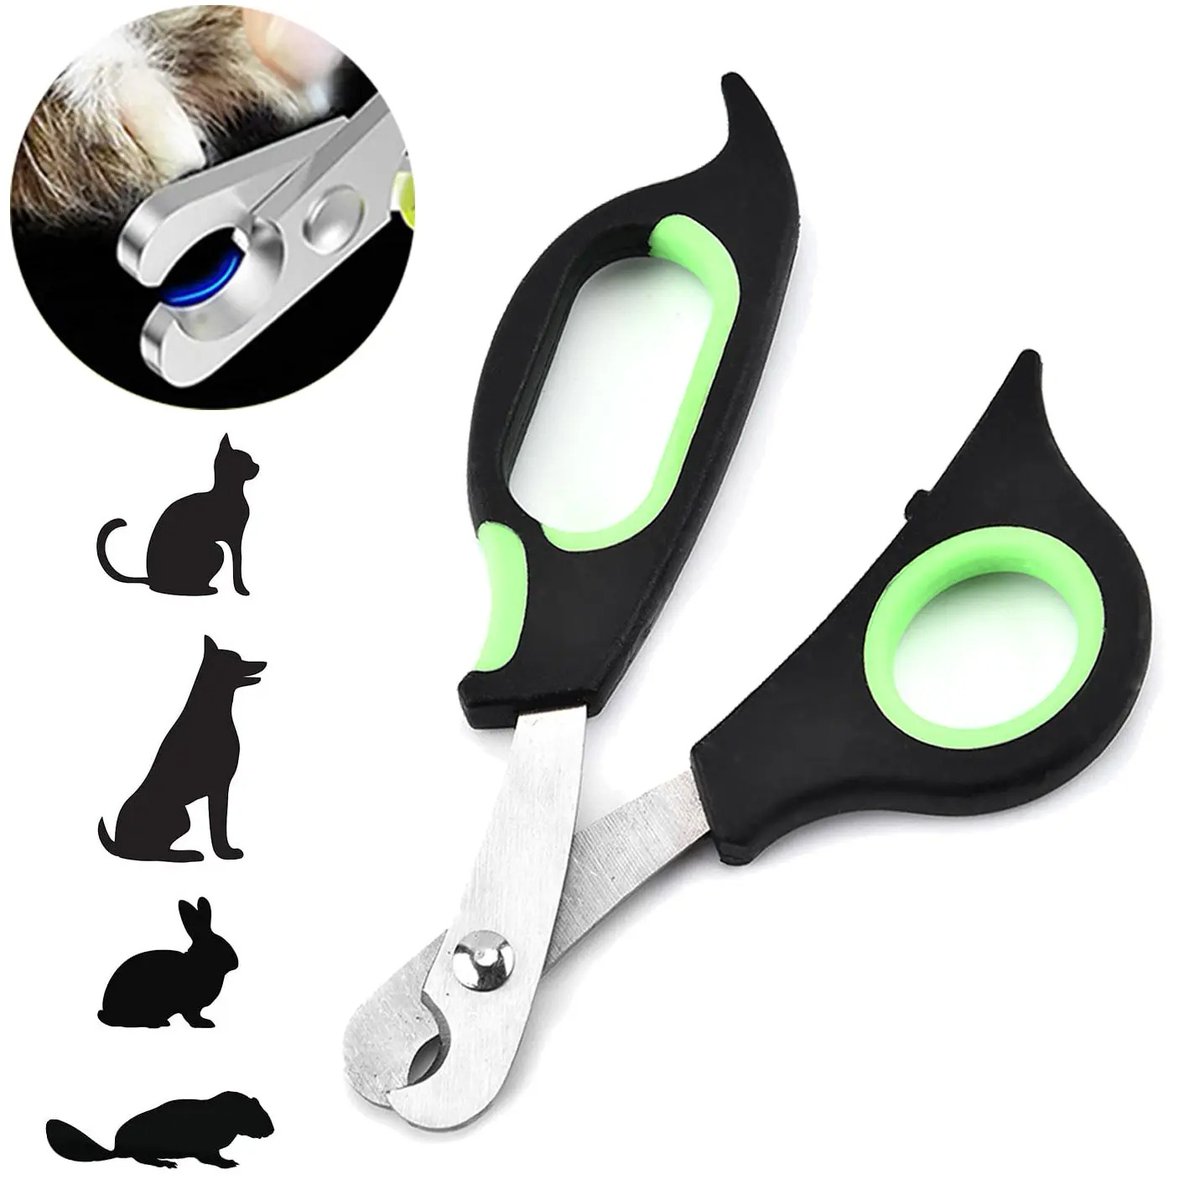 🐕✨ 'Grooming Made Easy' - Universal Clippers for Every Pet Owner
bingopets.shop/universal-pet-…

#dogsoftwitter #DogsOnTwitter #pets #dogstyle #dogstuff #Dog #Dogechain #petshoponline #petshopboys #petshaming #Cat #Cats #CatsOfTwitter #kitty #ilovecats